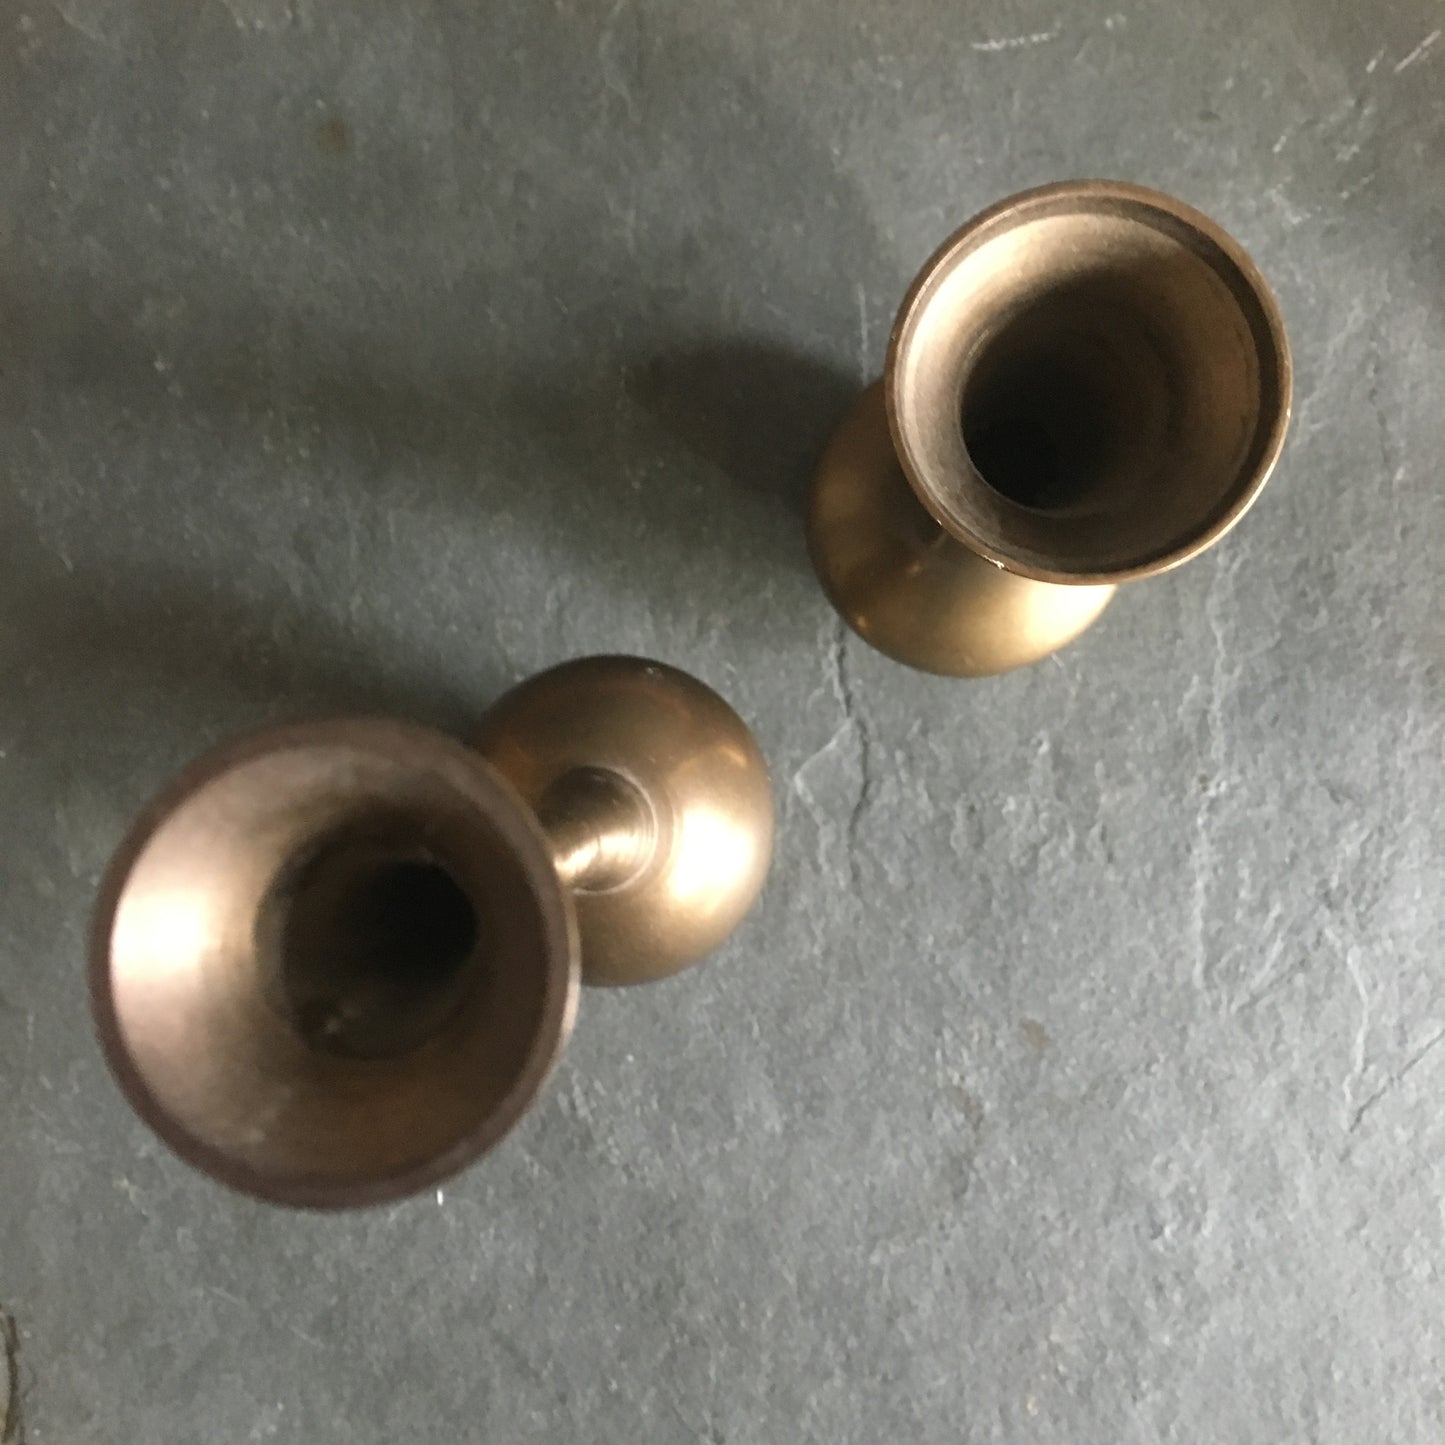 Vintage Brass Vases, Pair of Two in Antiqued Brass